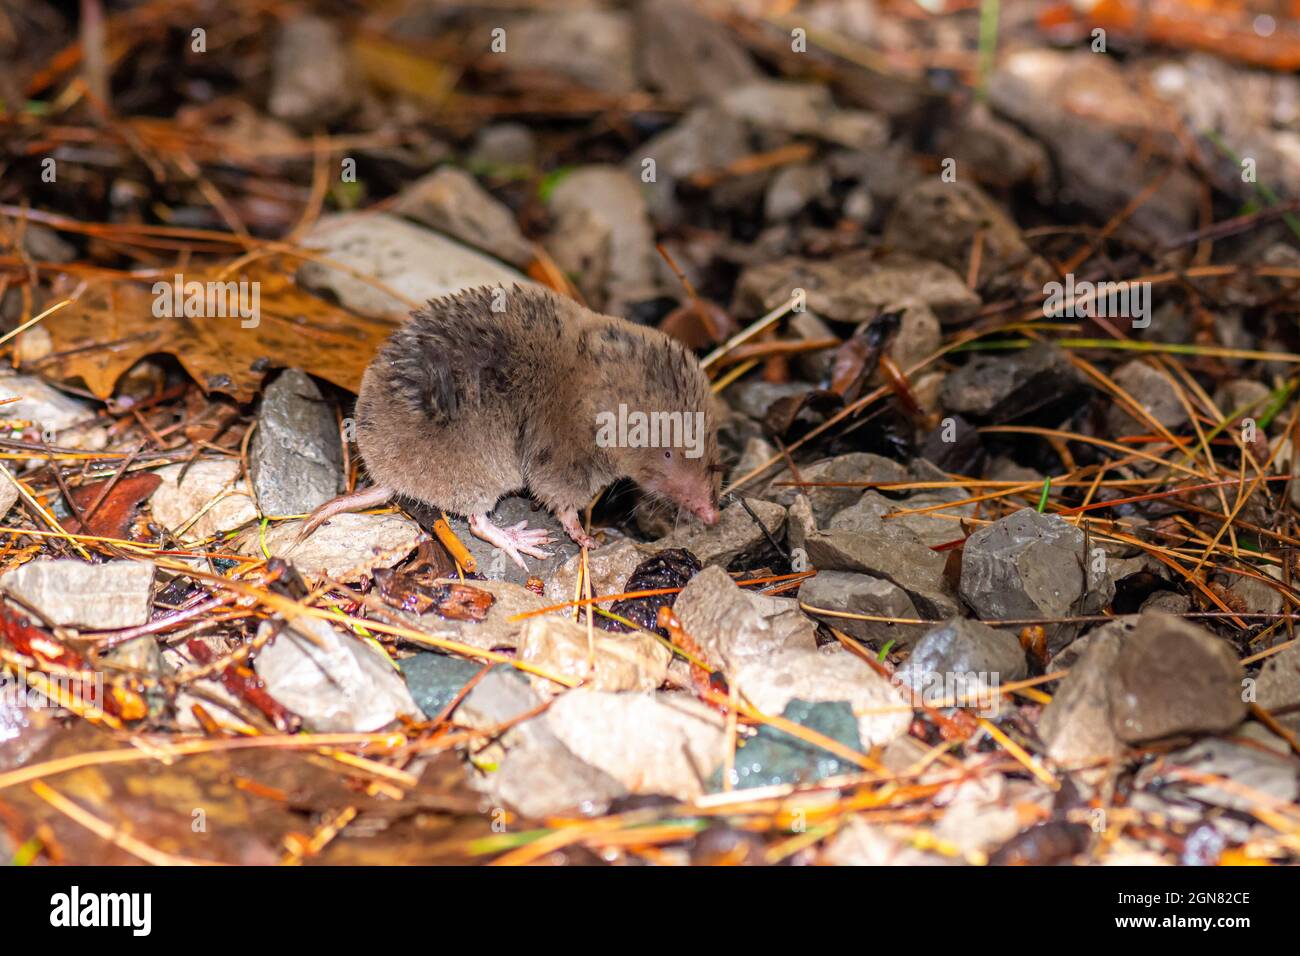 A Northern short-tailed shrew (Blarina brevicauda) searching for food in Michigan, USA. Stock Photo